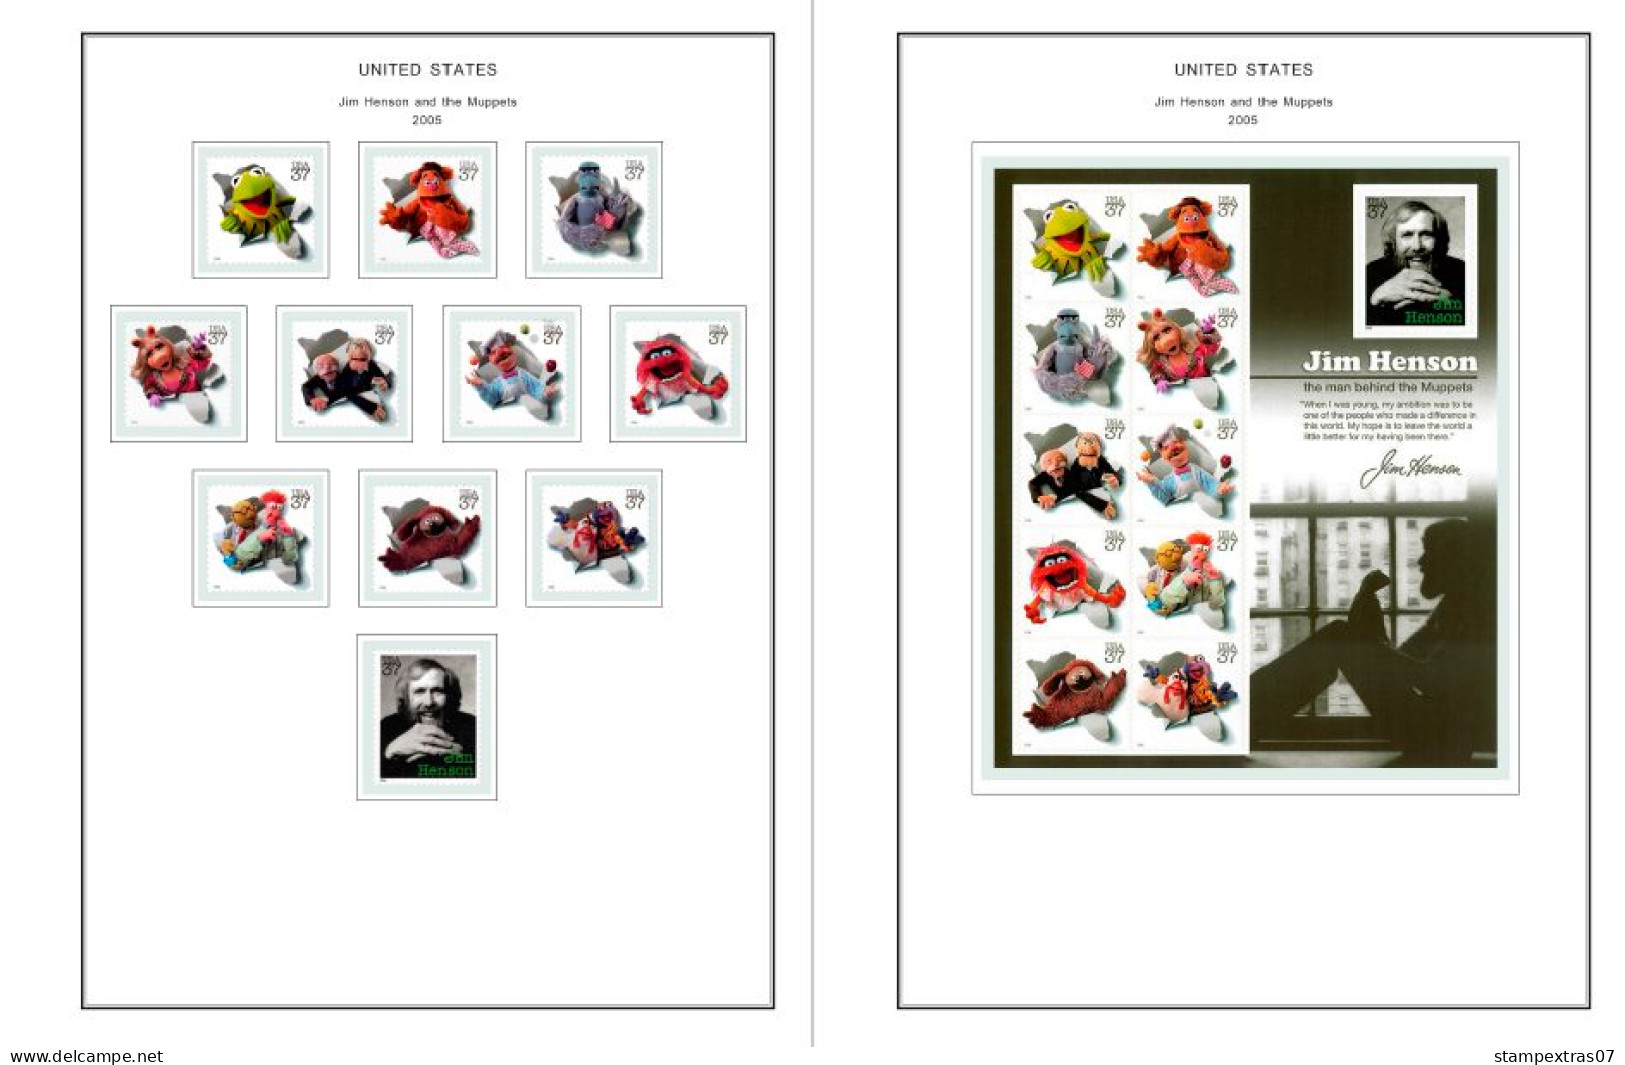 COLOR PRINTED USA 2005-2010 STAMP ALBUM PAGES (90 illustrated pages) >> FEUILLES ALBUM